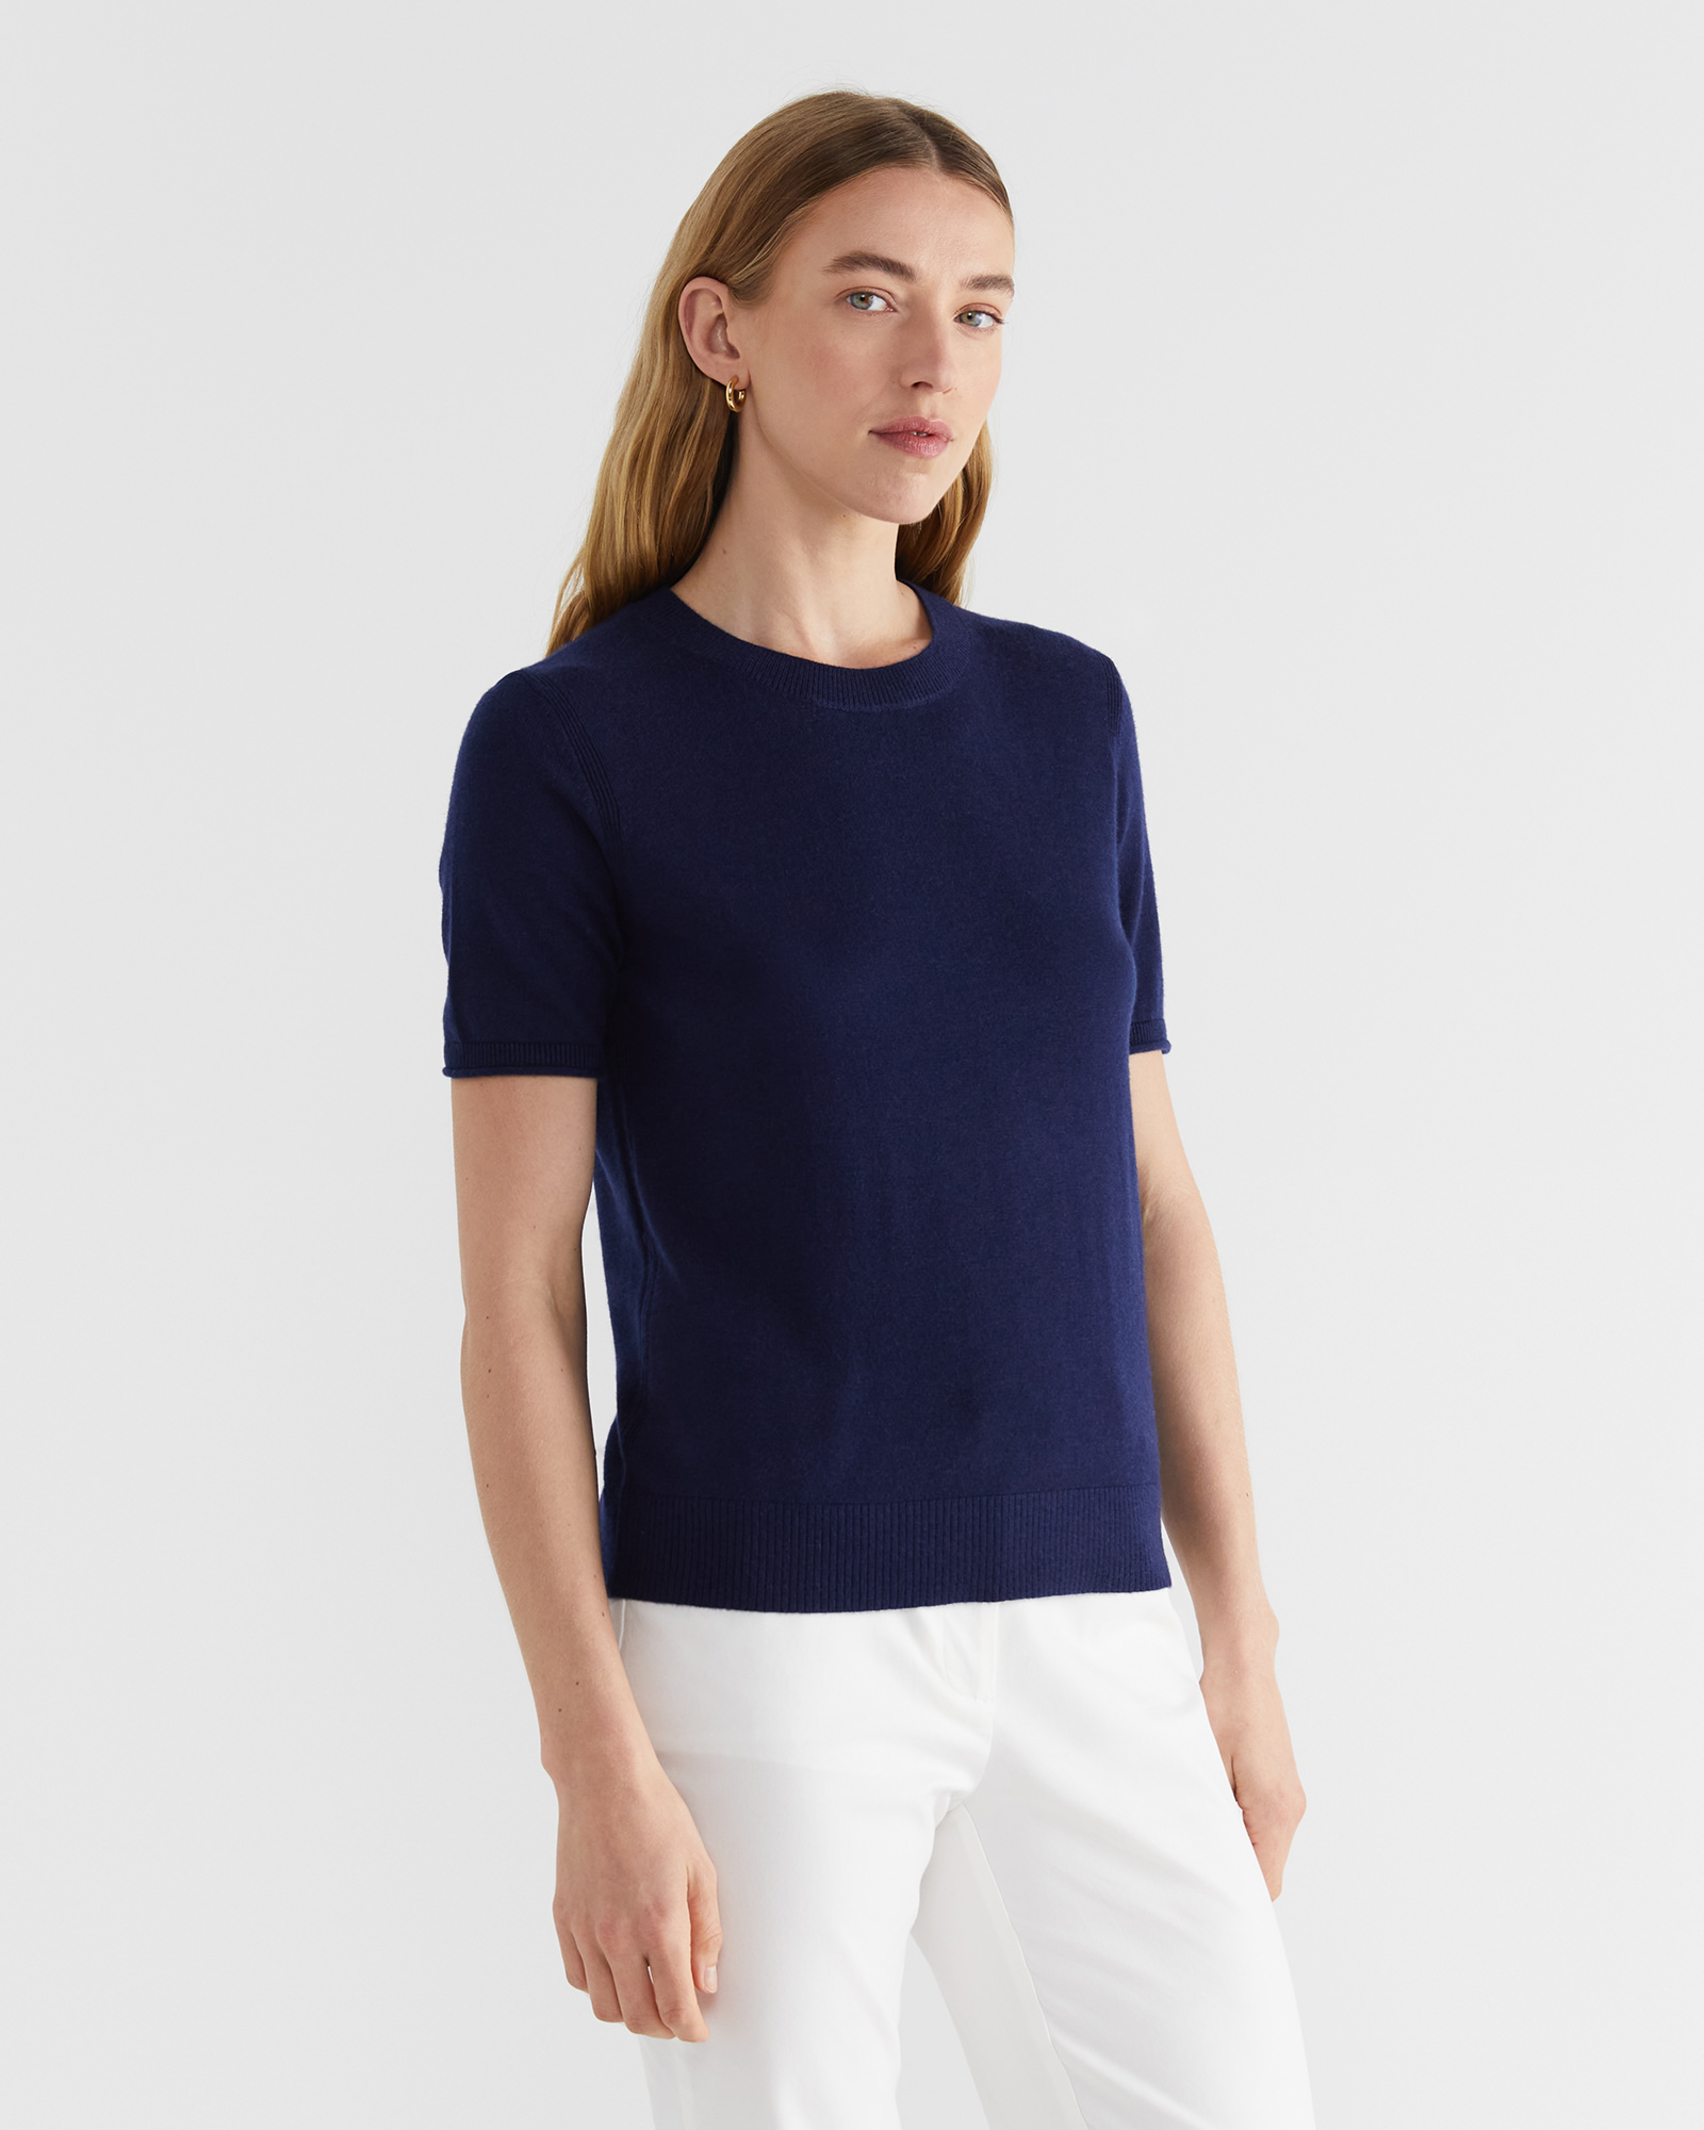 Laurina Knit Tee in NAVY